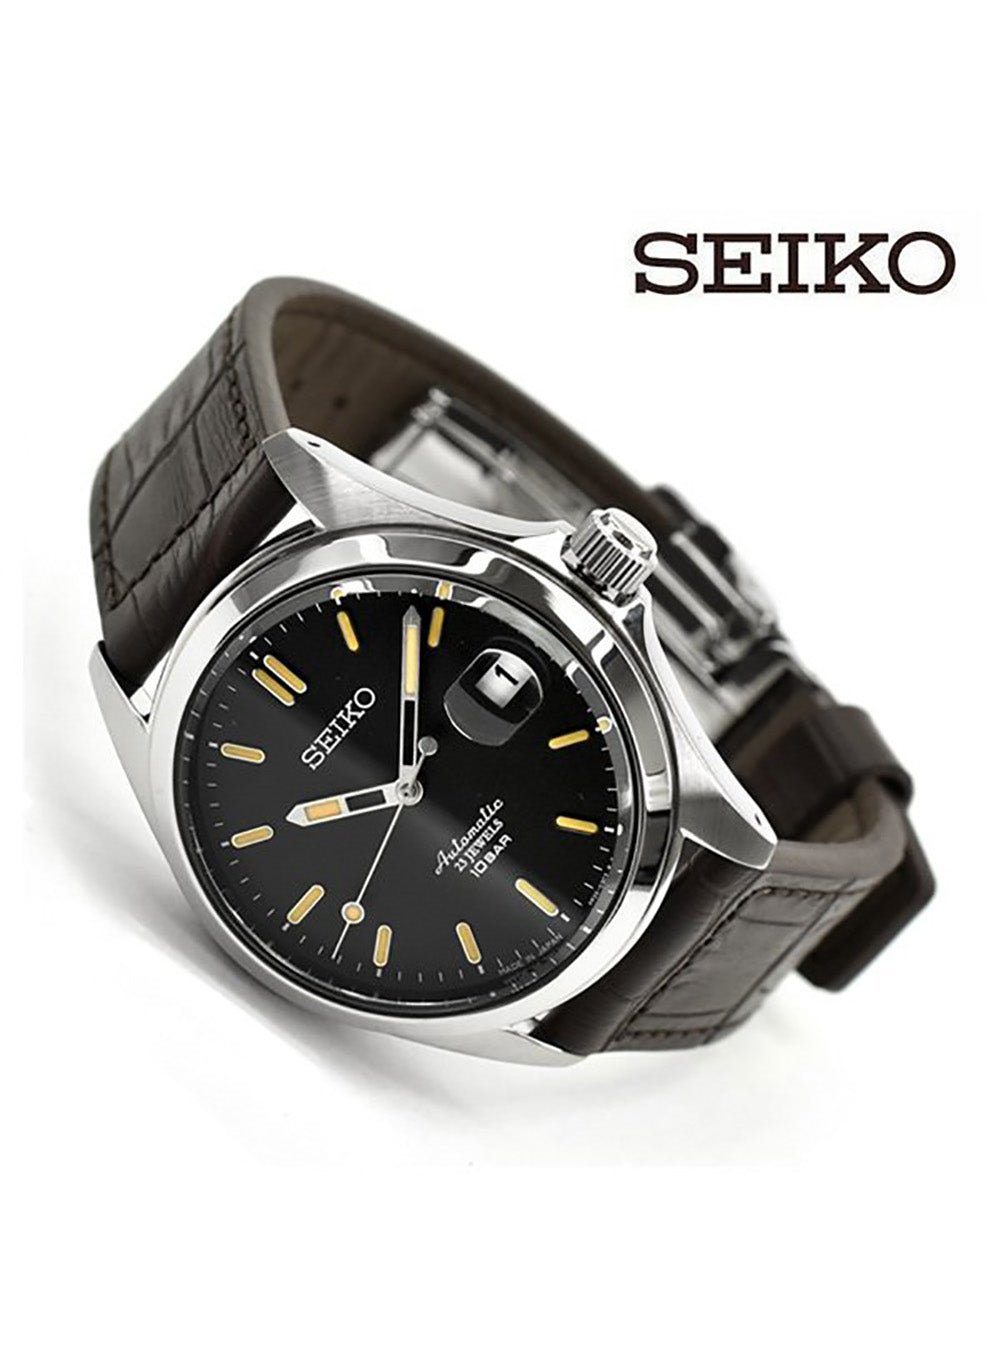 SEIKO AUTOMATIC MECHANICAL CLASSIC LINE SZSB017 SHOP LIMITED MADE IN JAPAN  JDM